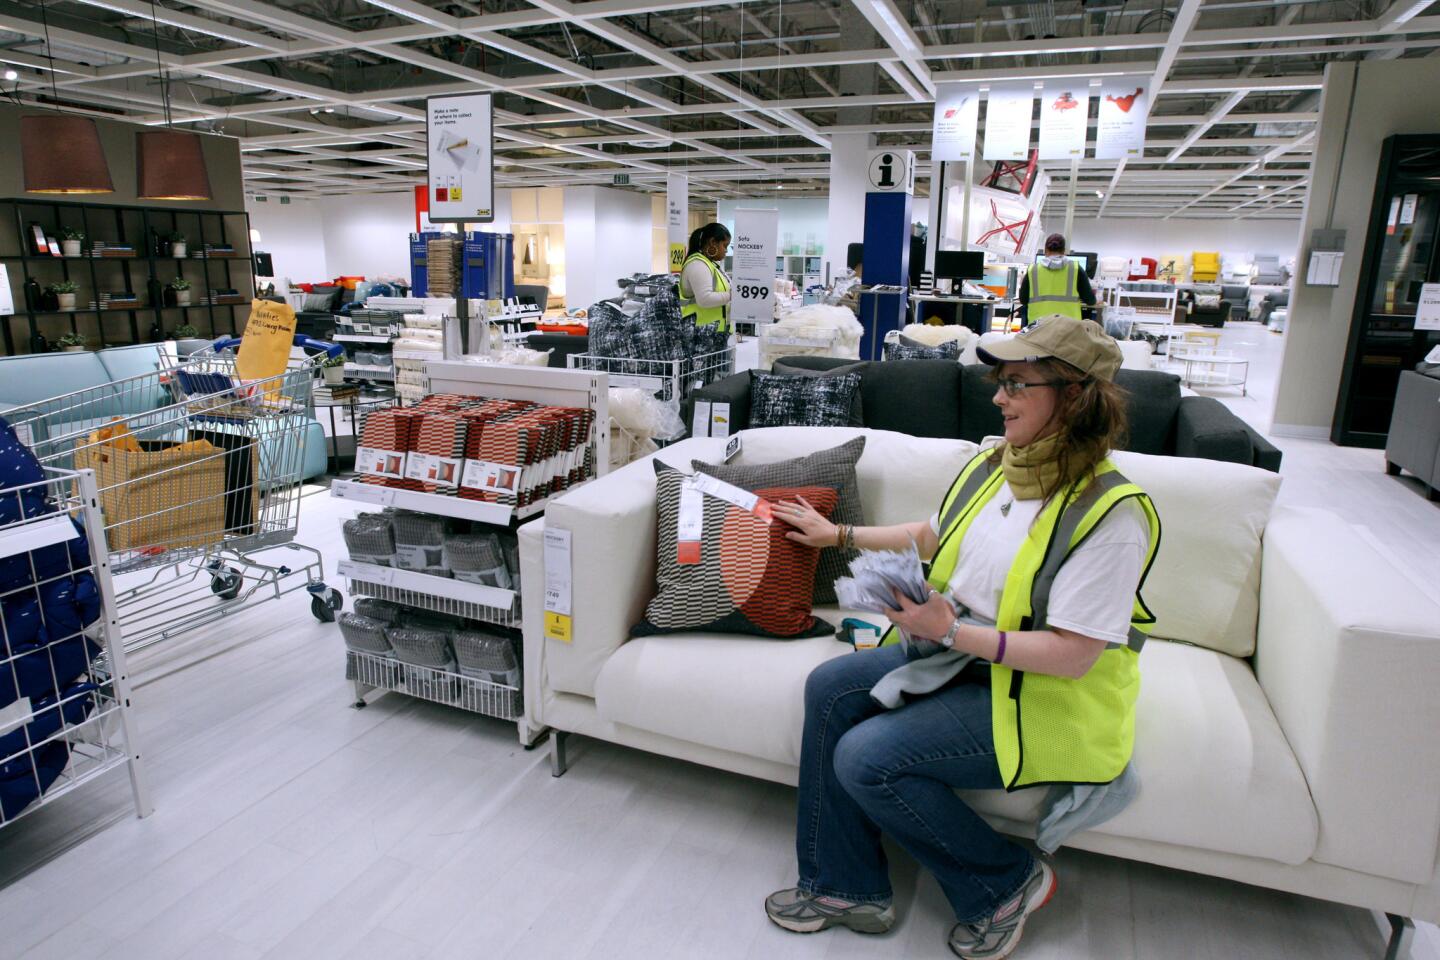 Photo Gallery: Largest Ikea store in the United States set to open February 8 in Burbank